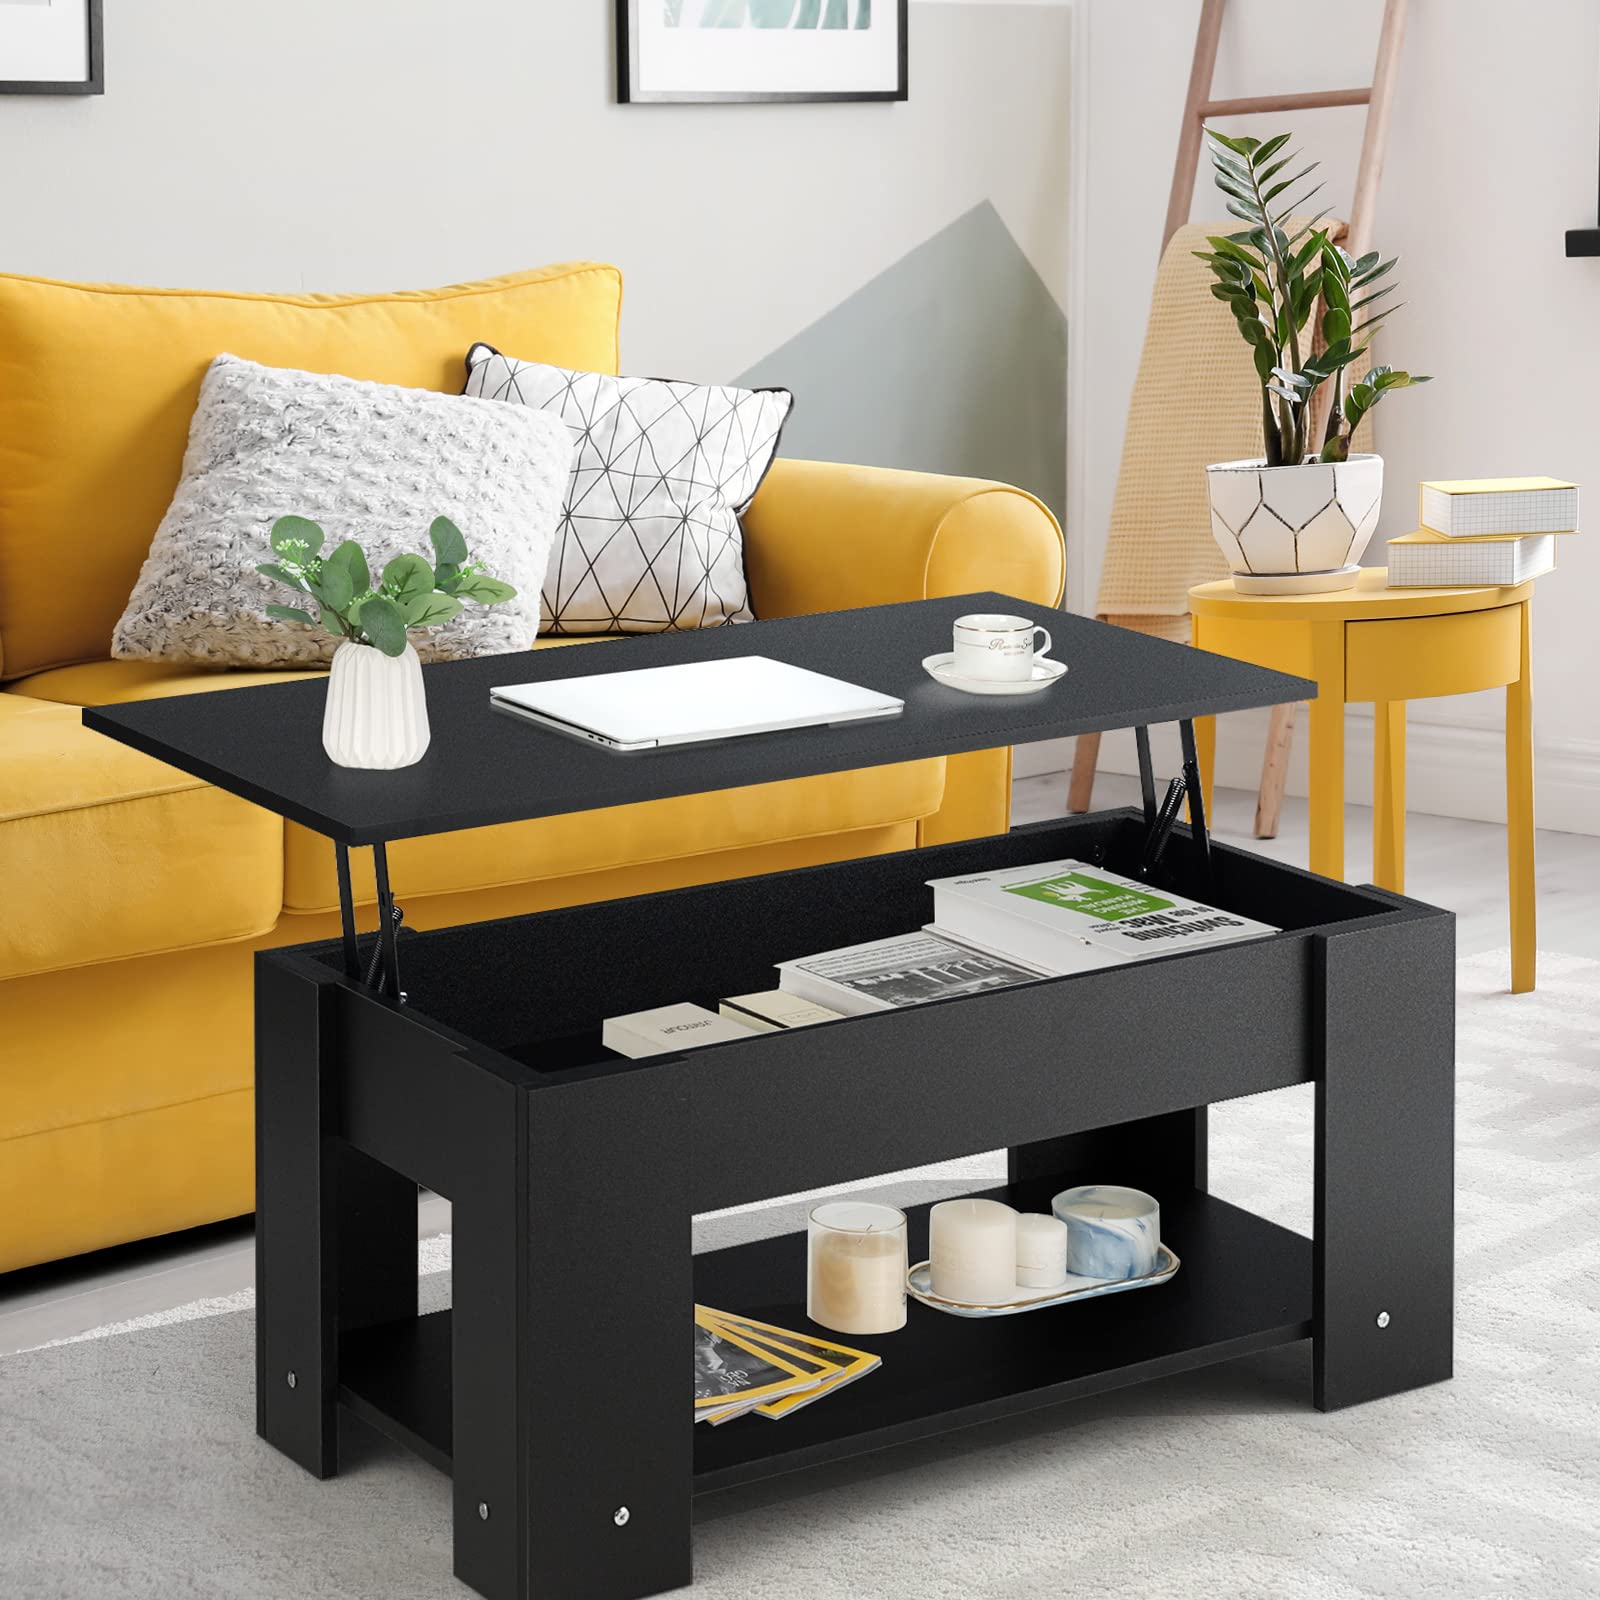 Giantex Lift Top Coffee Table, Modern Cocktail Table w/Hidden Compartment & Open Storage Shelf